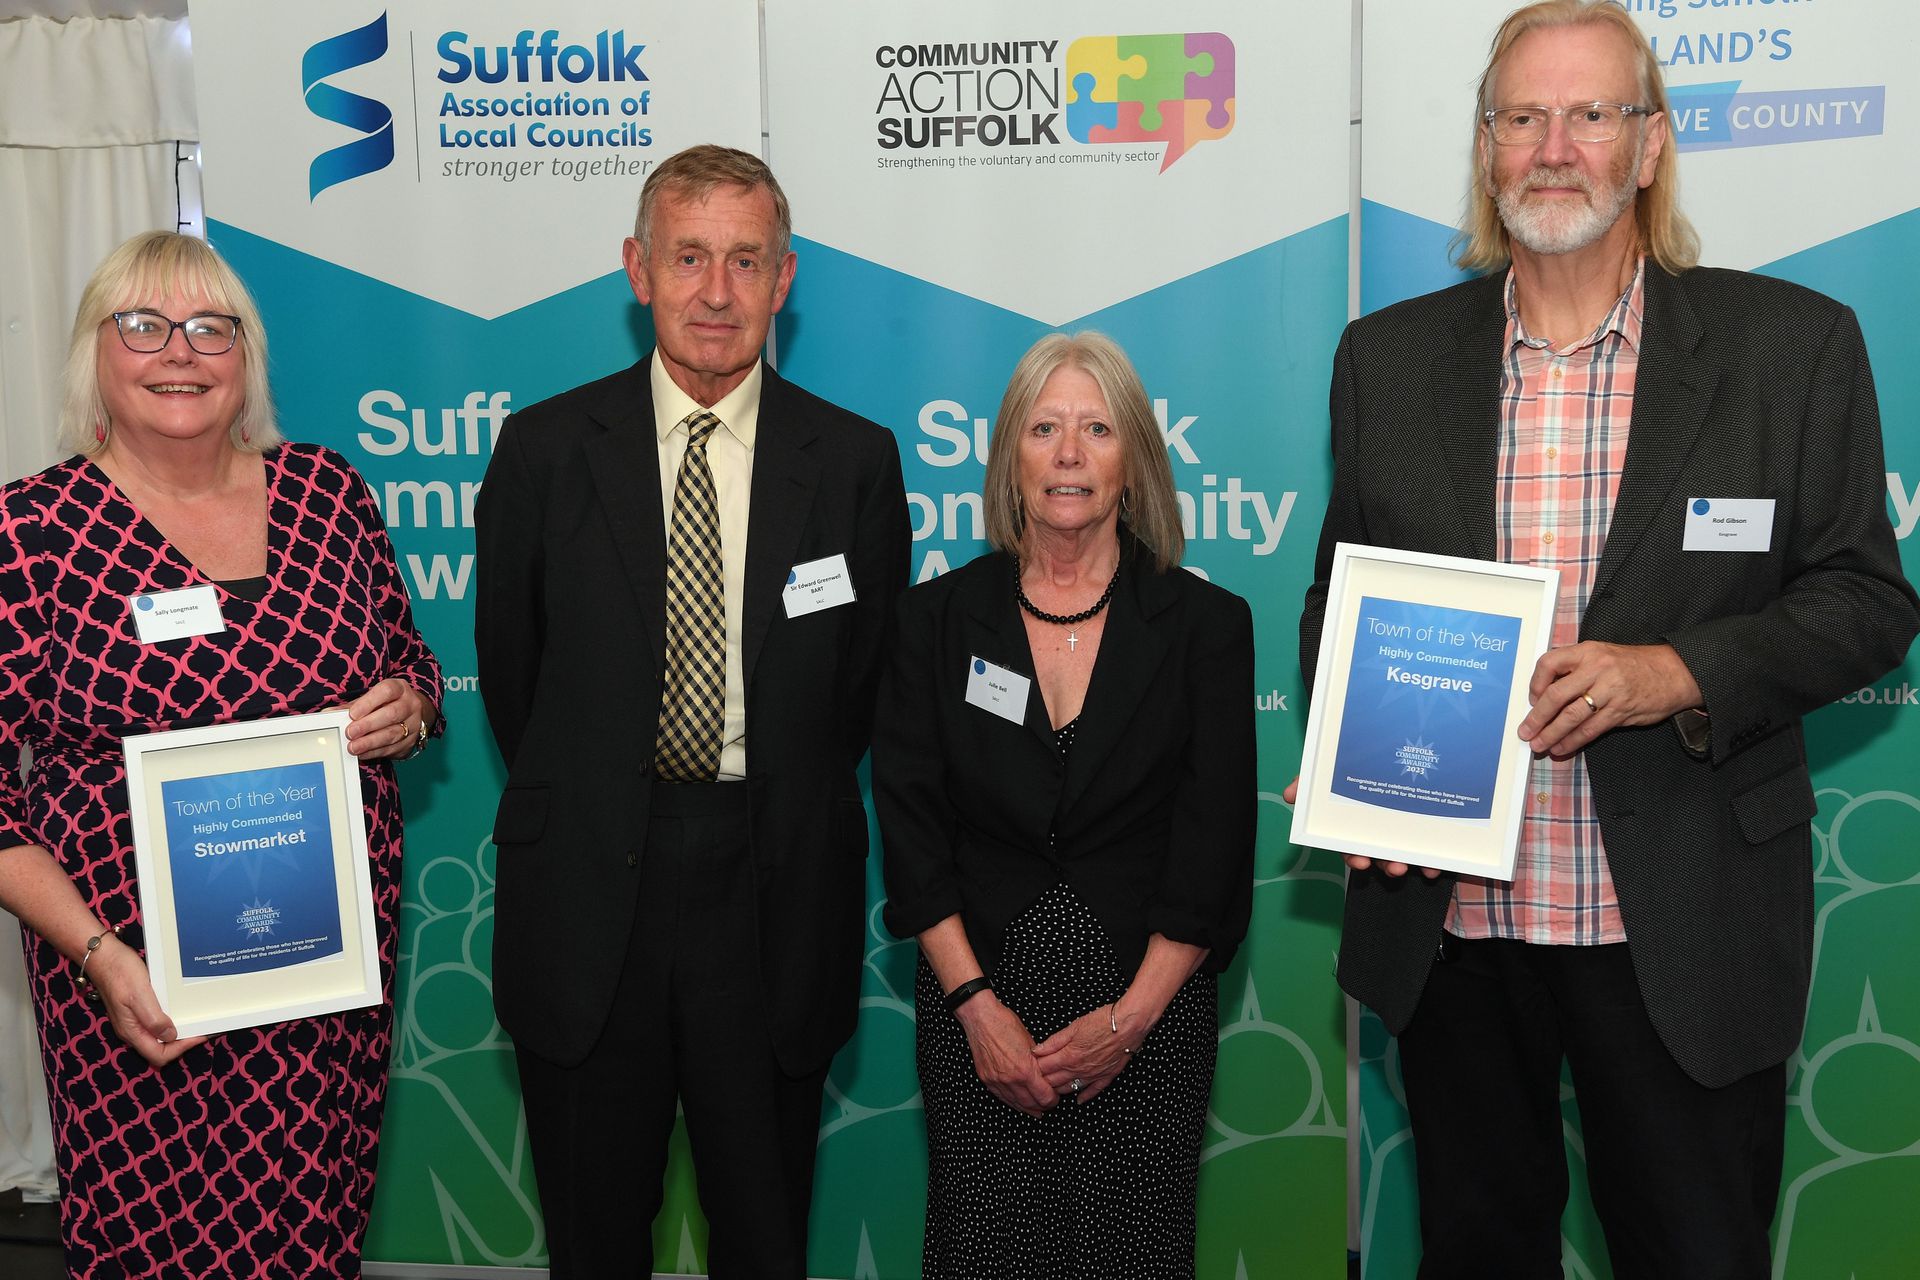 Stowmarket and Kesgrave received highly commended certificates